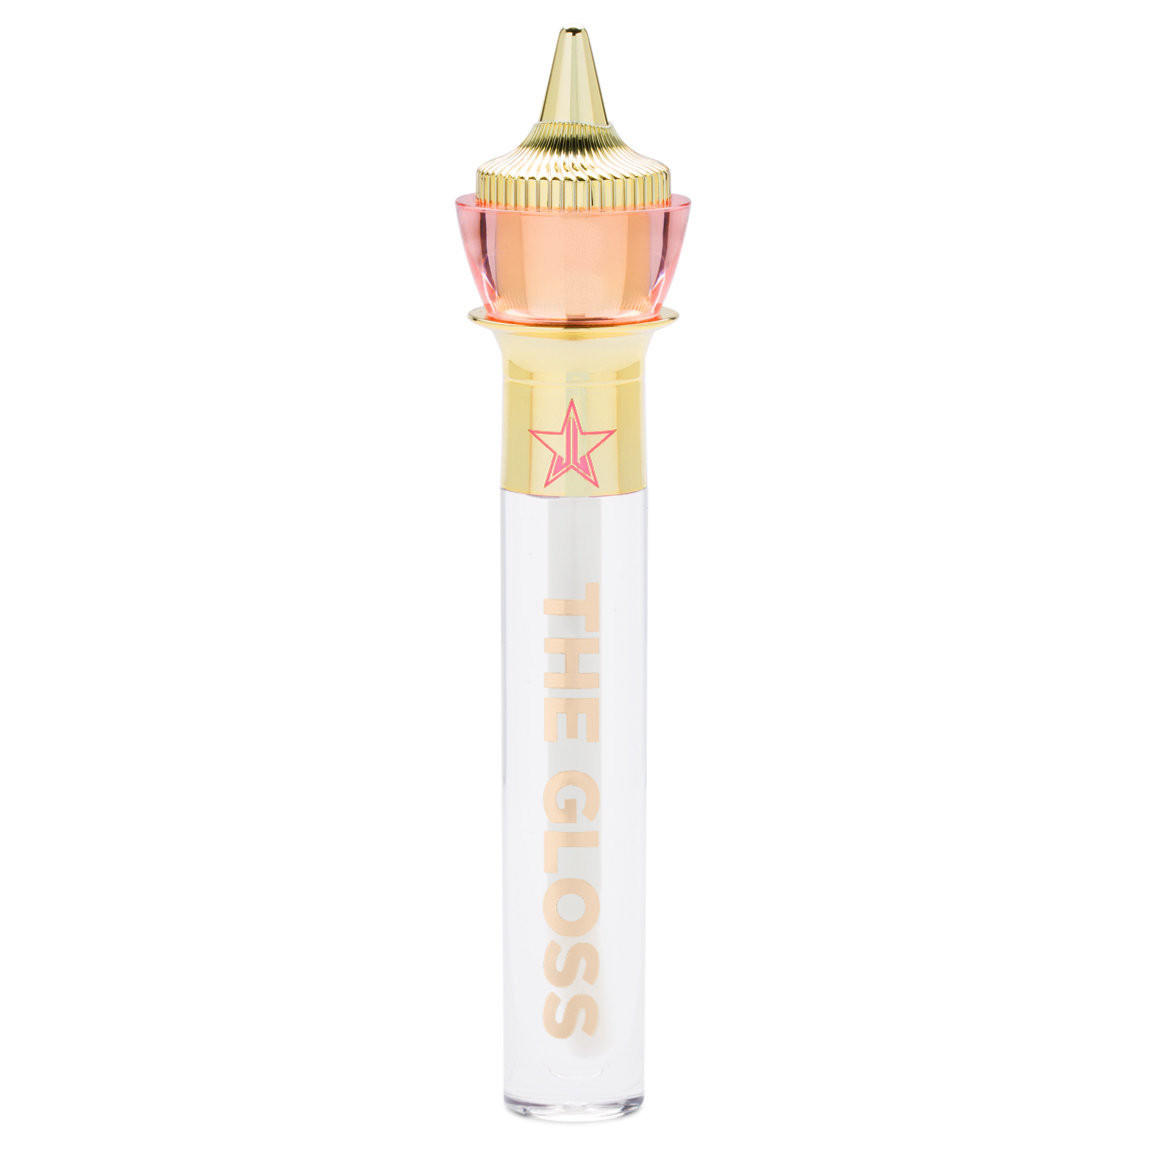 Jeffree Star The Gloss Let Me Be Perfectly Clear